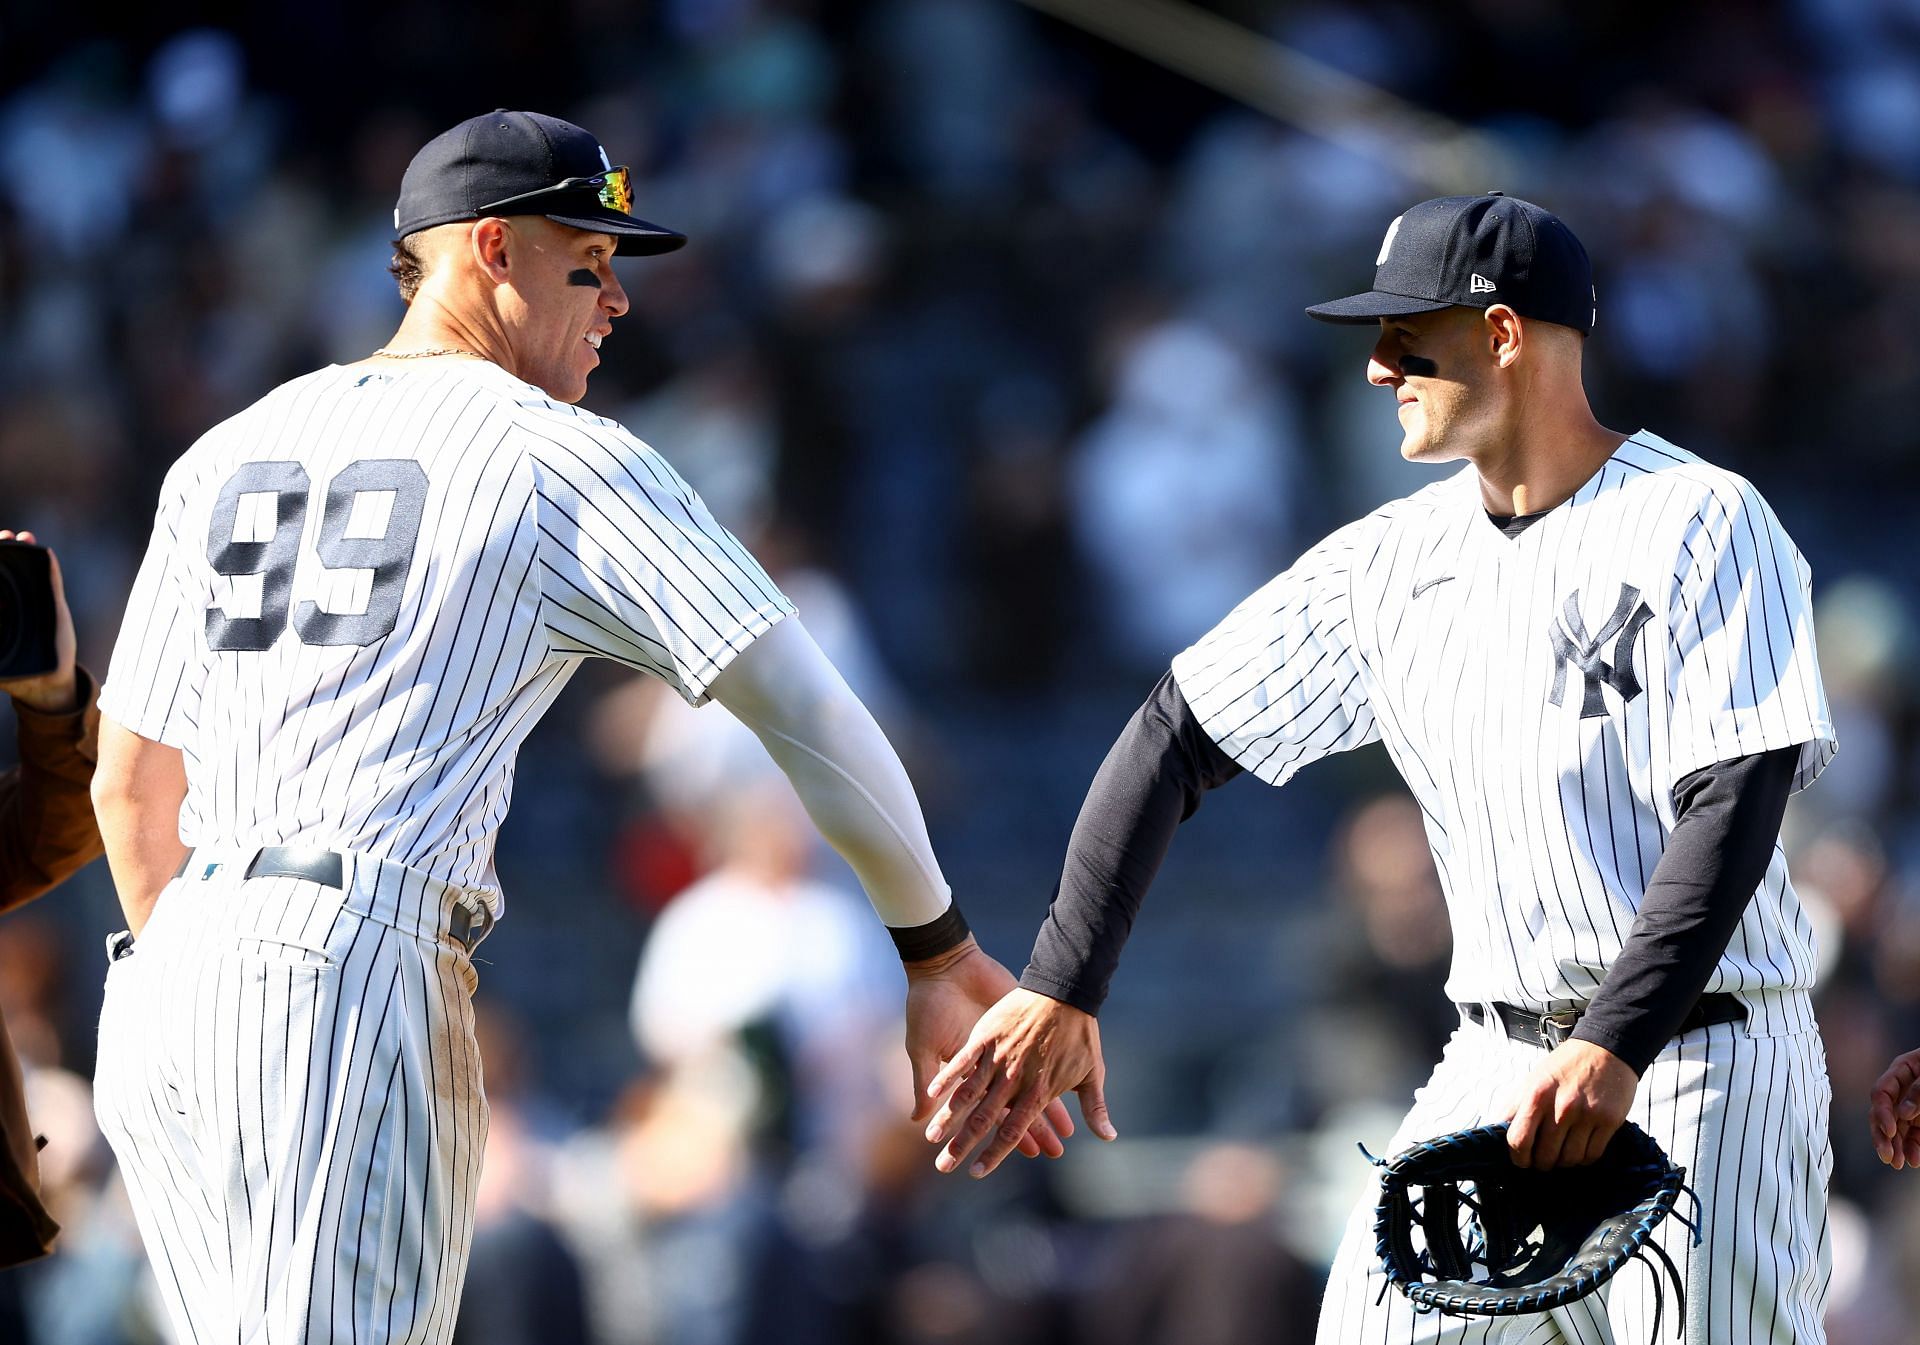 New York Yankees: Aaron Judge, Anthony Rizzo, and D.J. LeMahieu